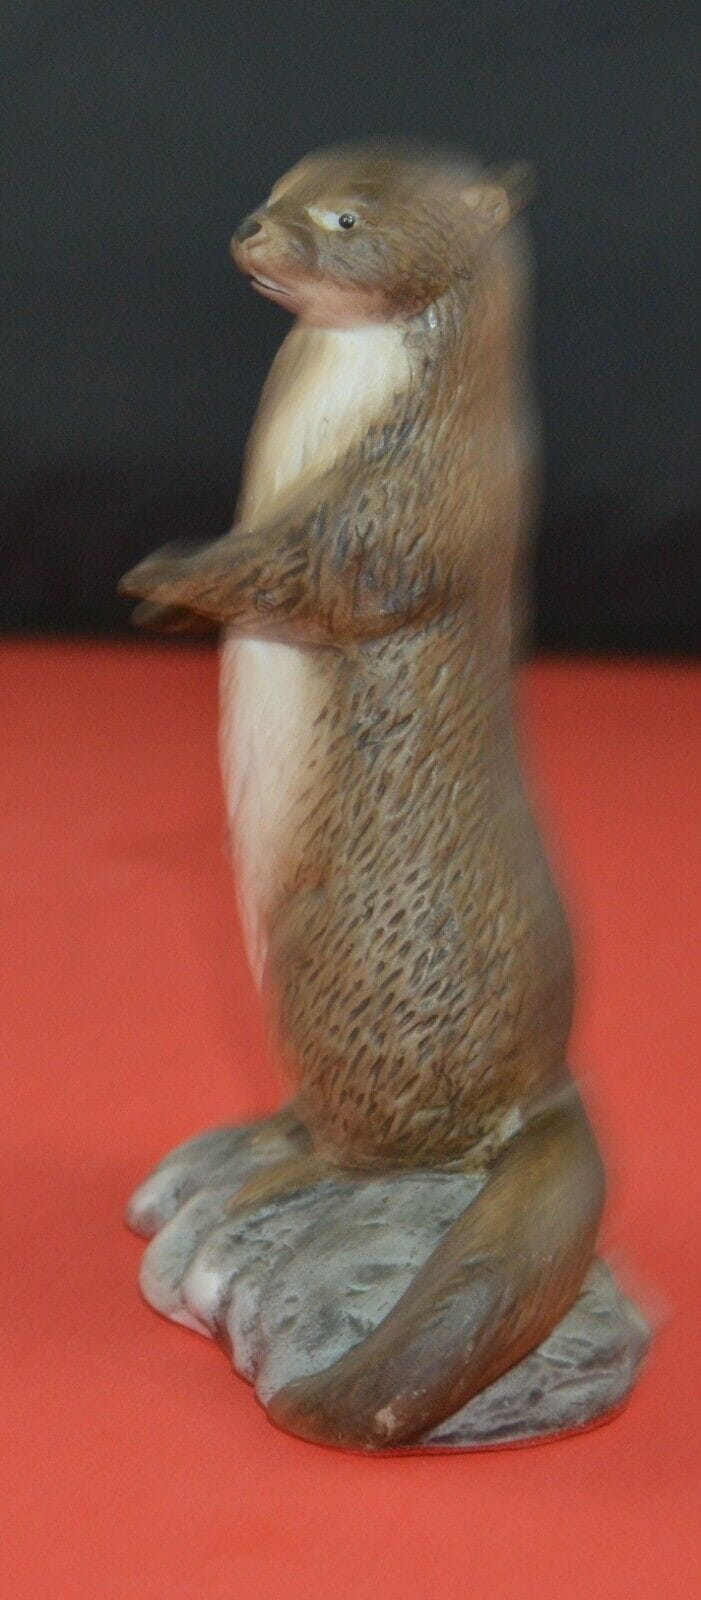 ANIMAL FIGURINE OTTER(PREVIOUSLY OWNED) GOOD CONDITION - TMD167207